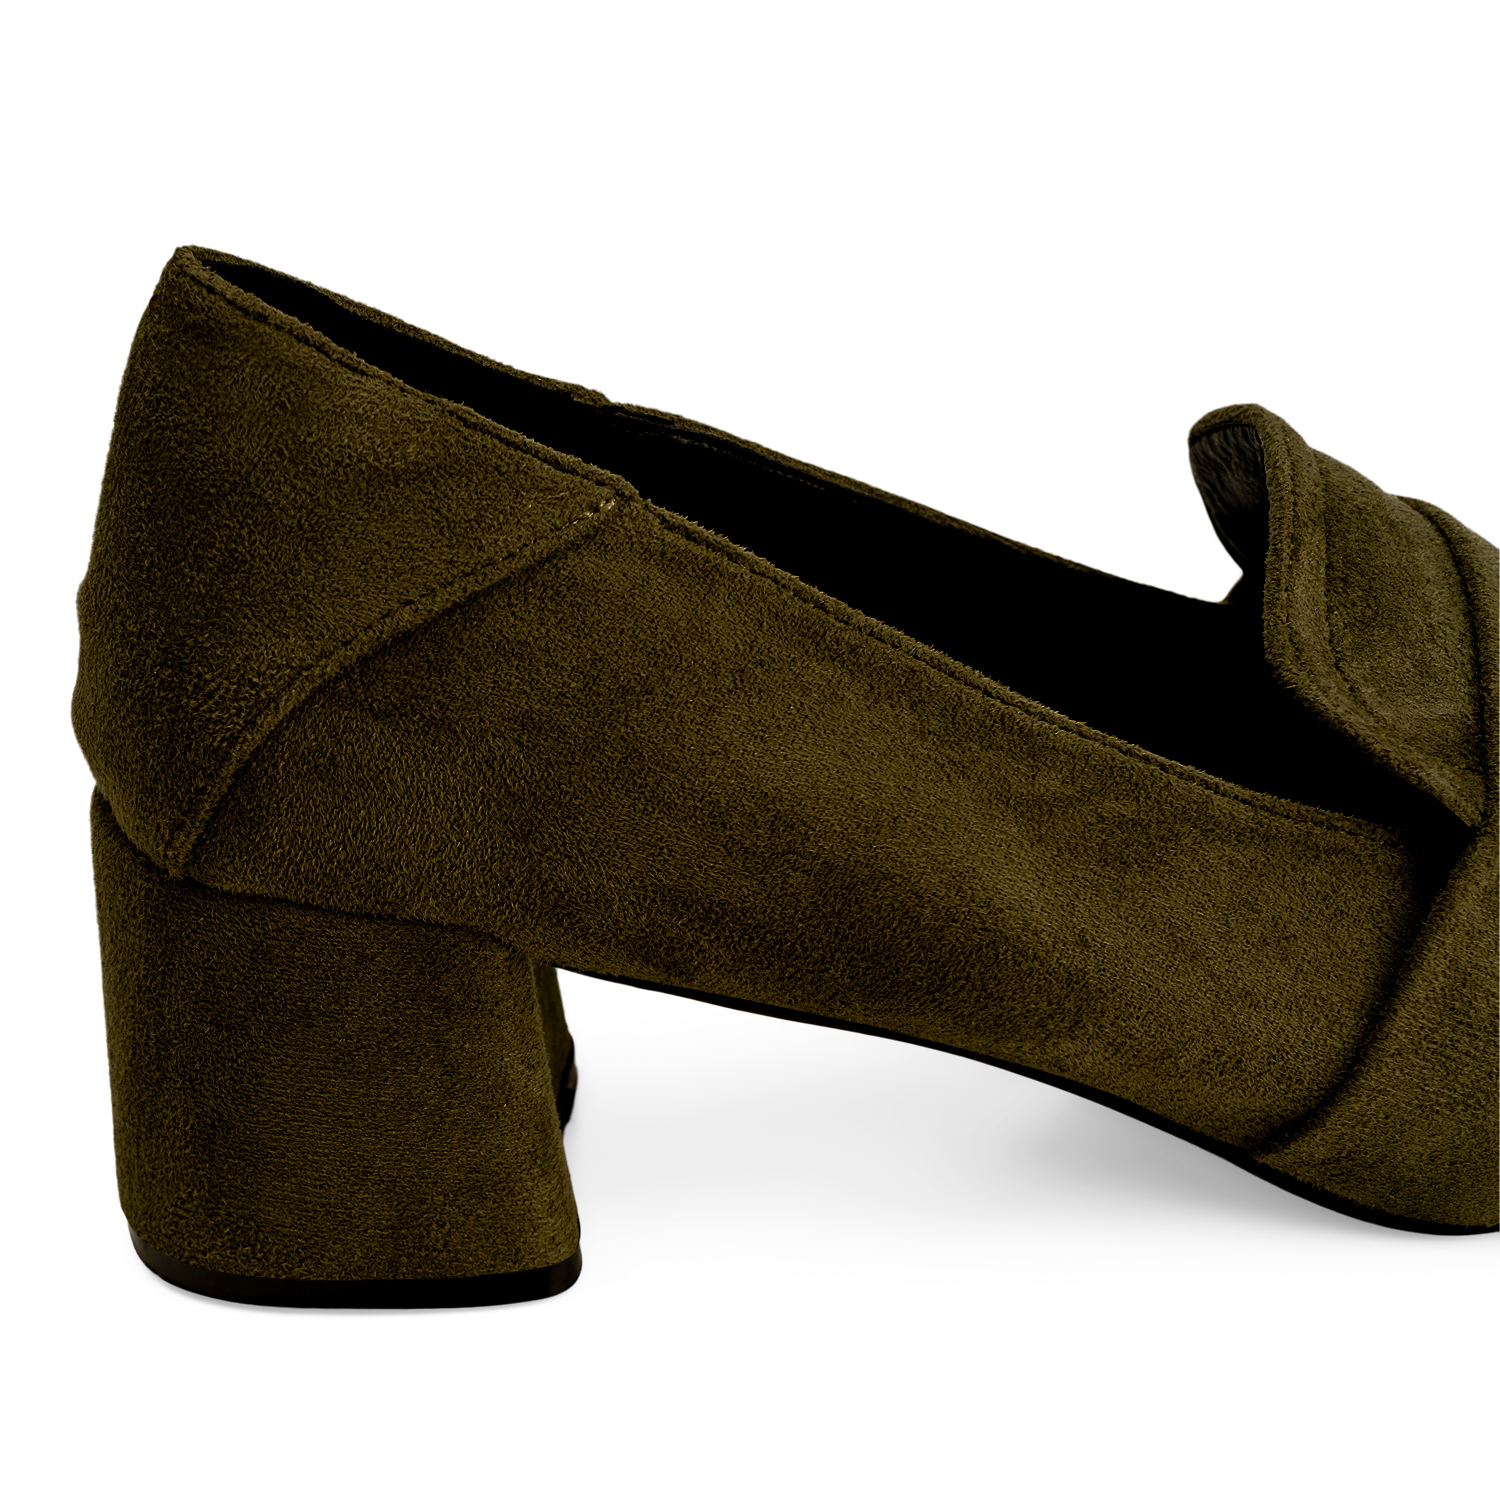 Heeled moccasin in kiwi faux suede 